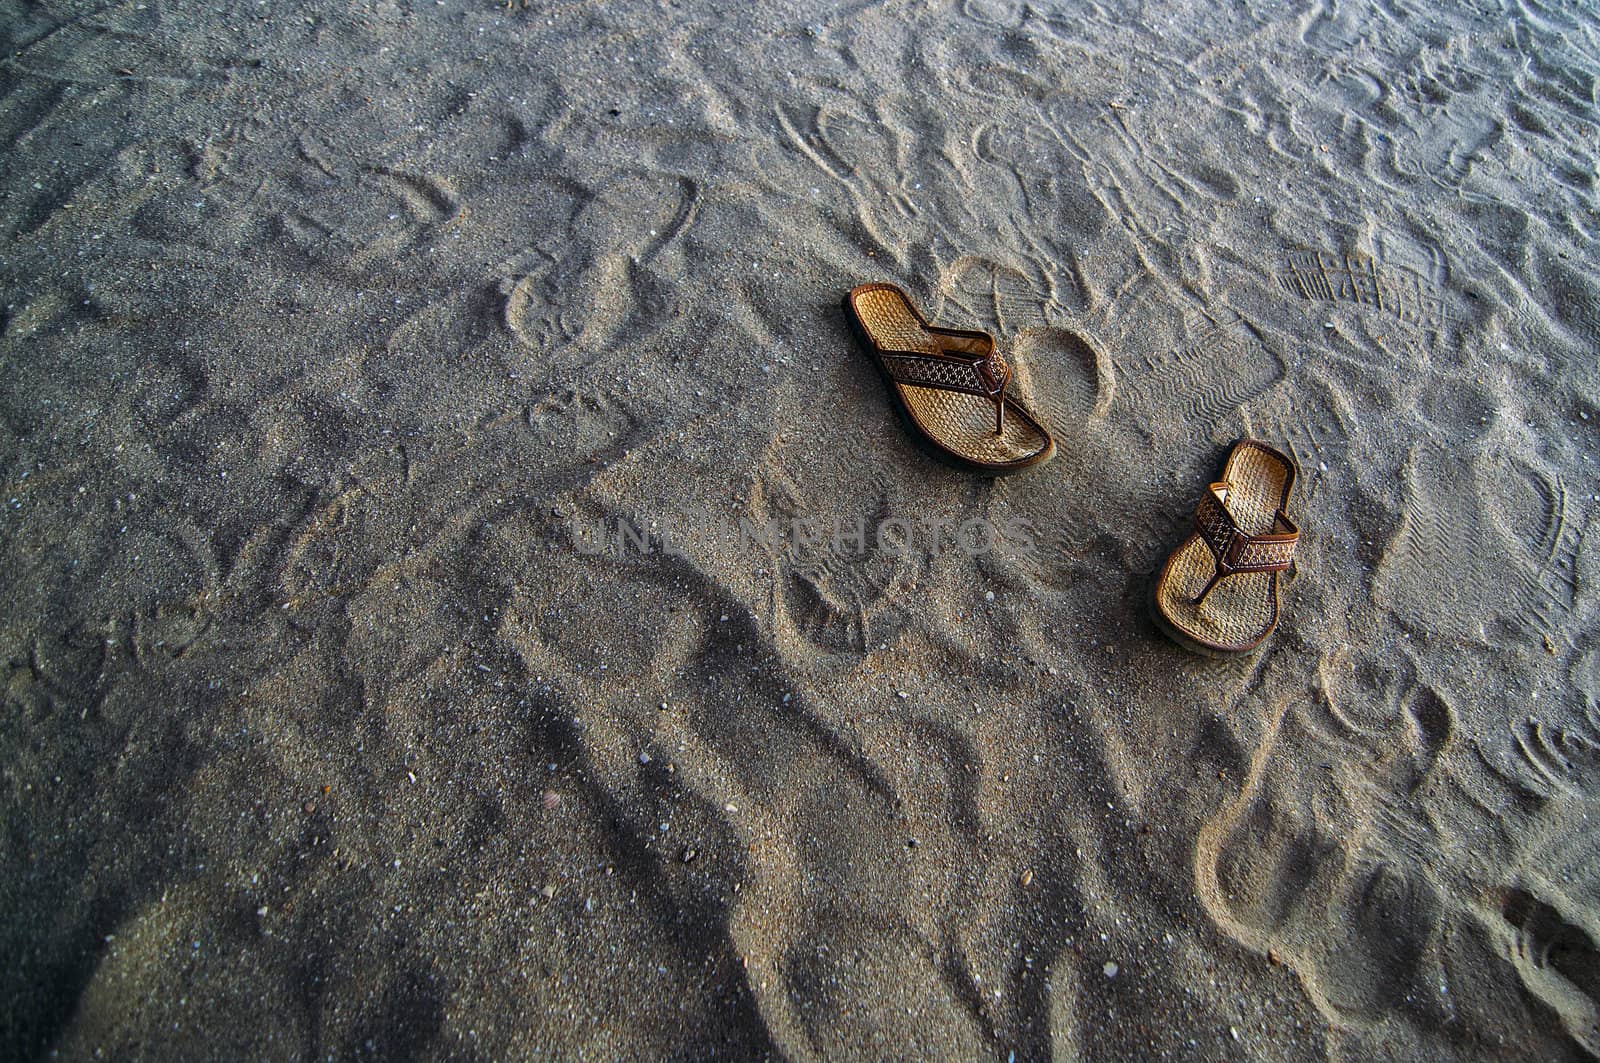 Flip flops in the sand at a beach.